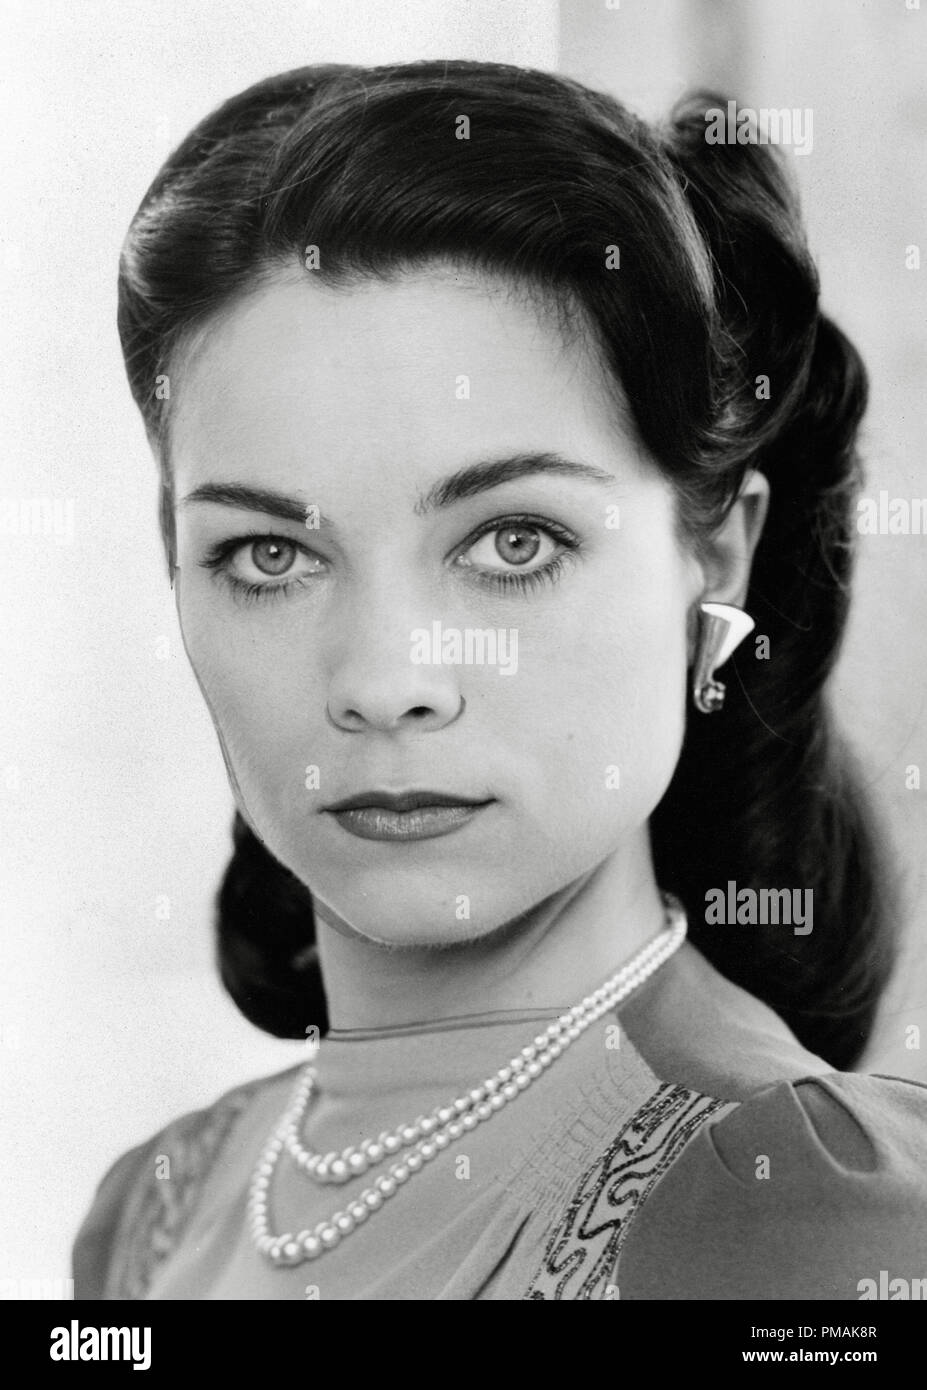 Theresa russell hi-res stock photography and images - Alamy